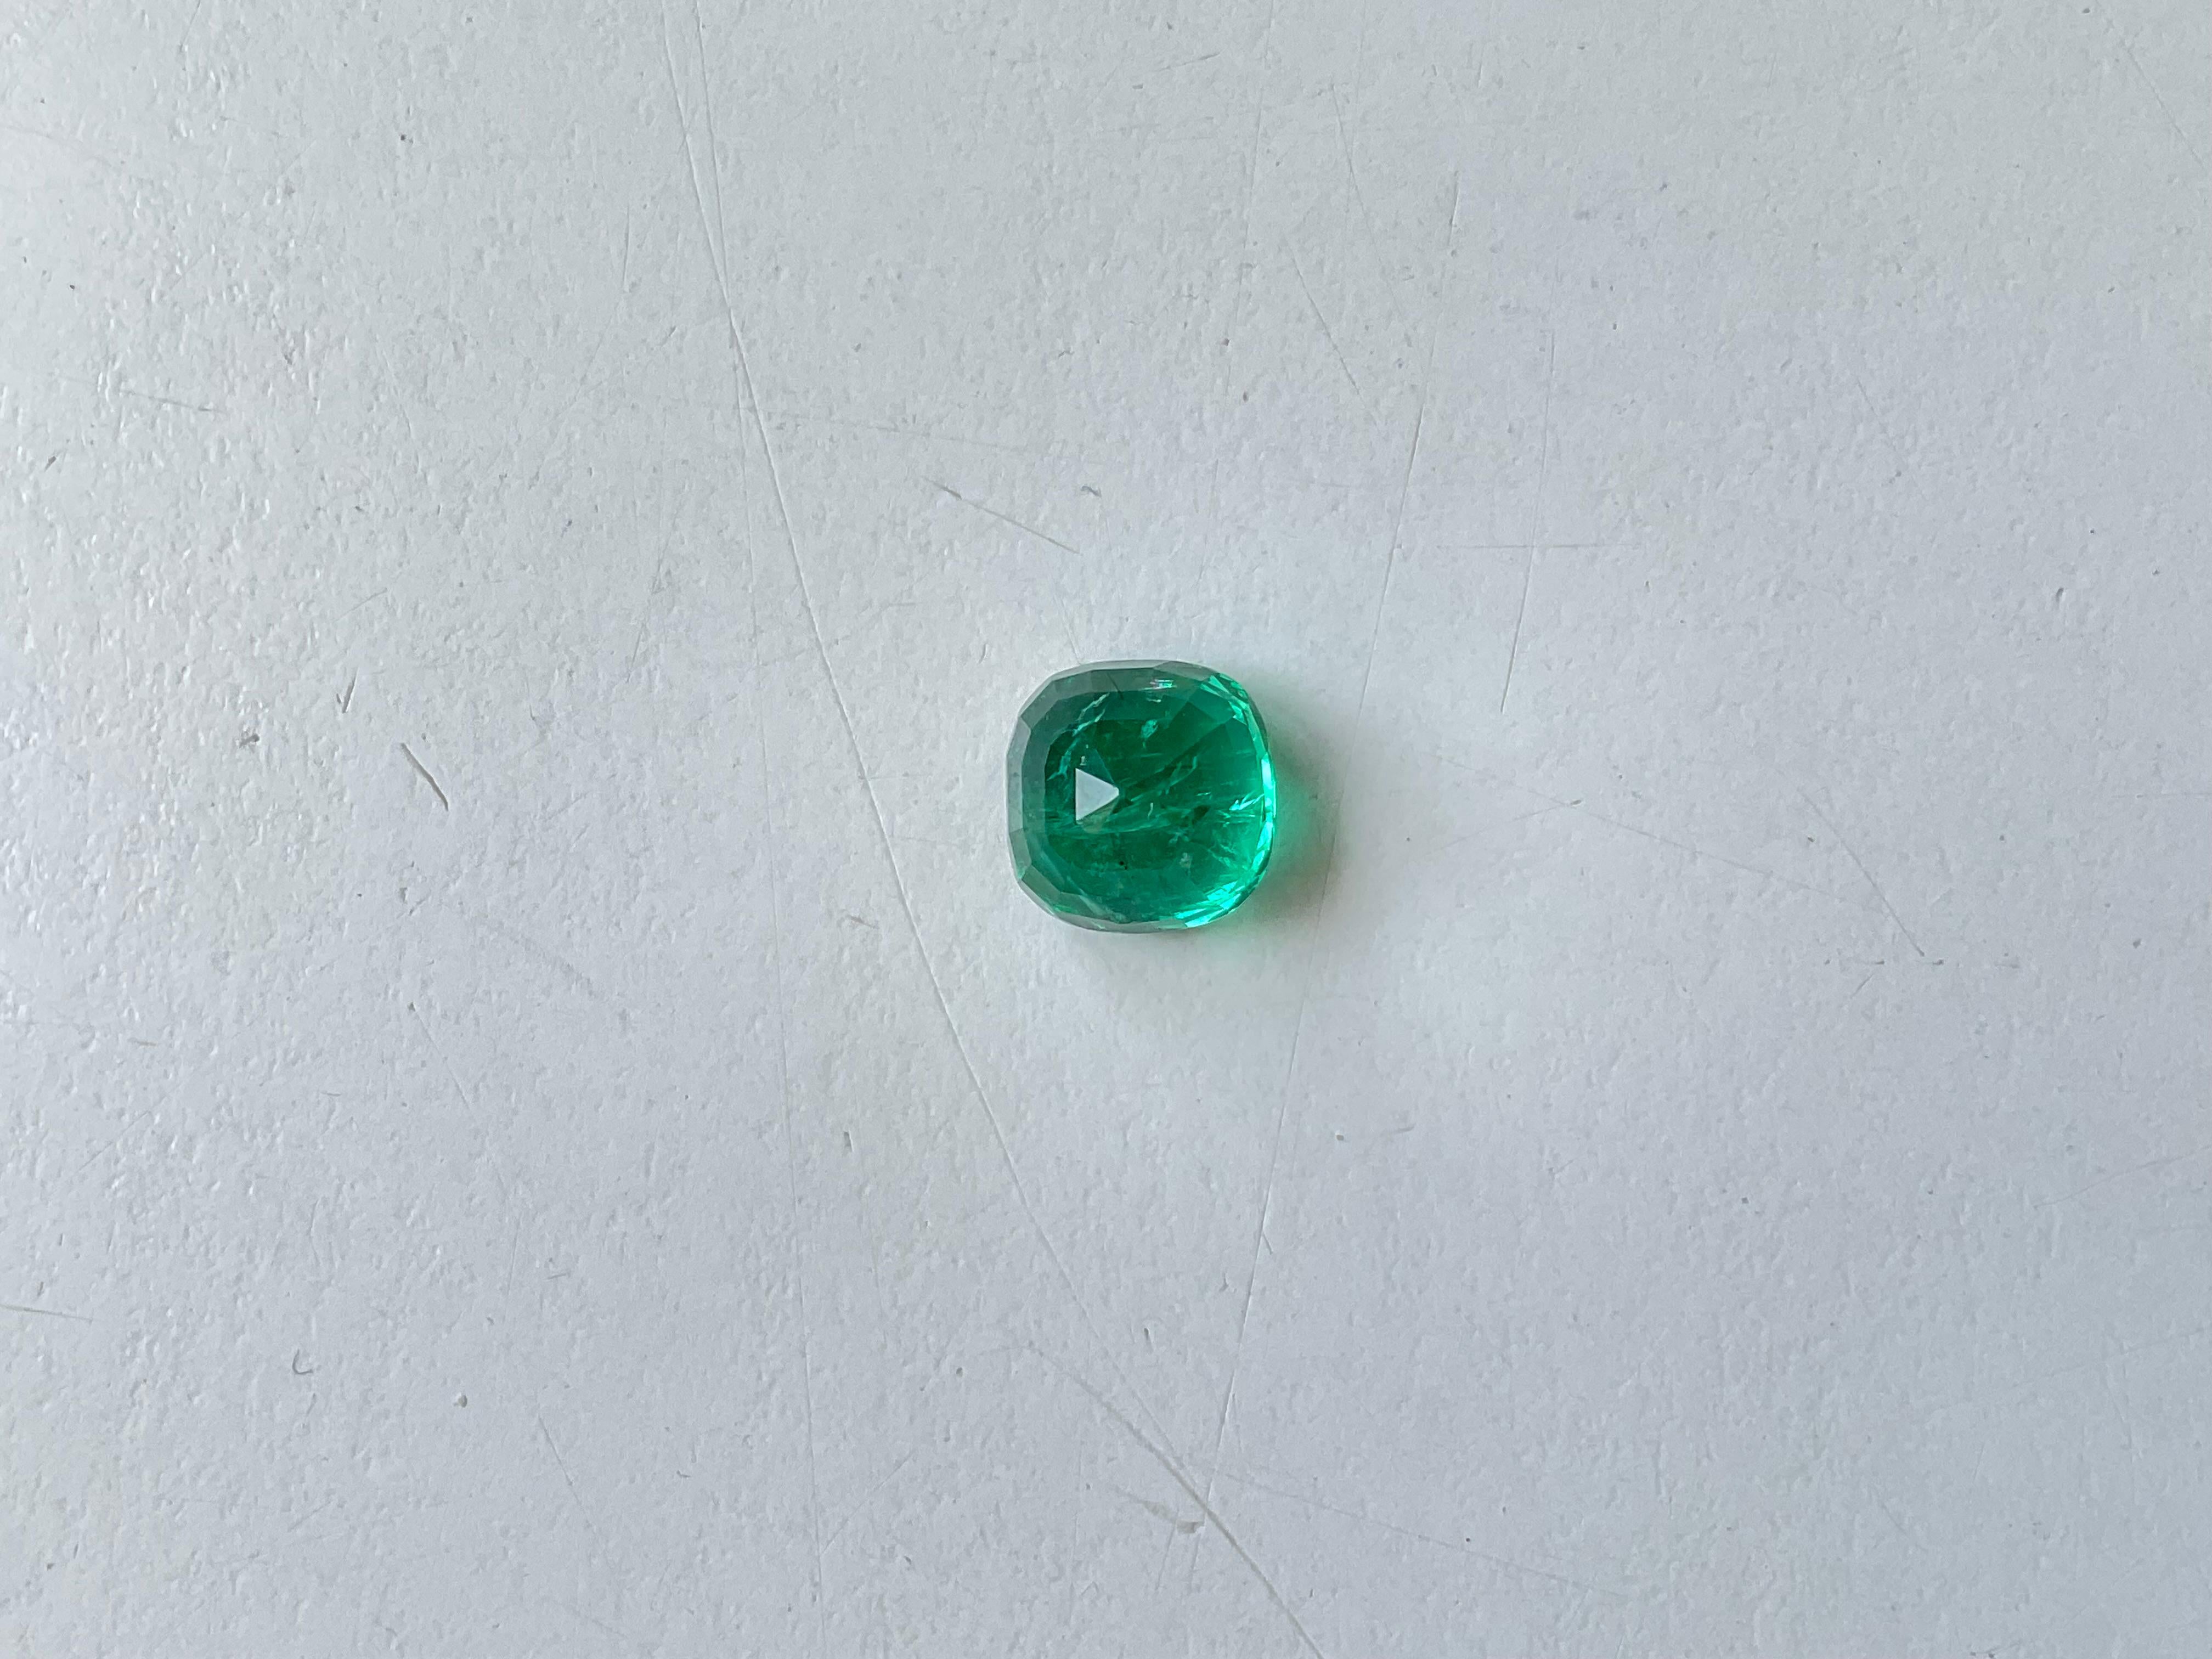 Art Deco Zambian Emerald Square Cushion Faceted Cut Stone Loose Gemstone for Jewelry